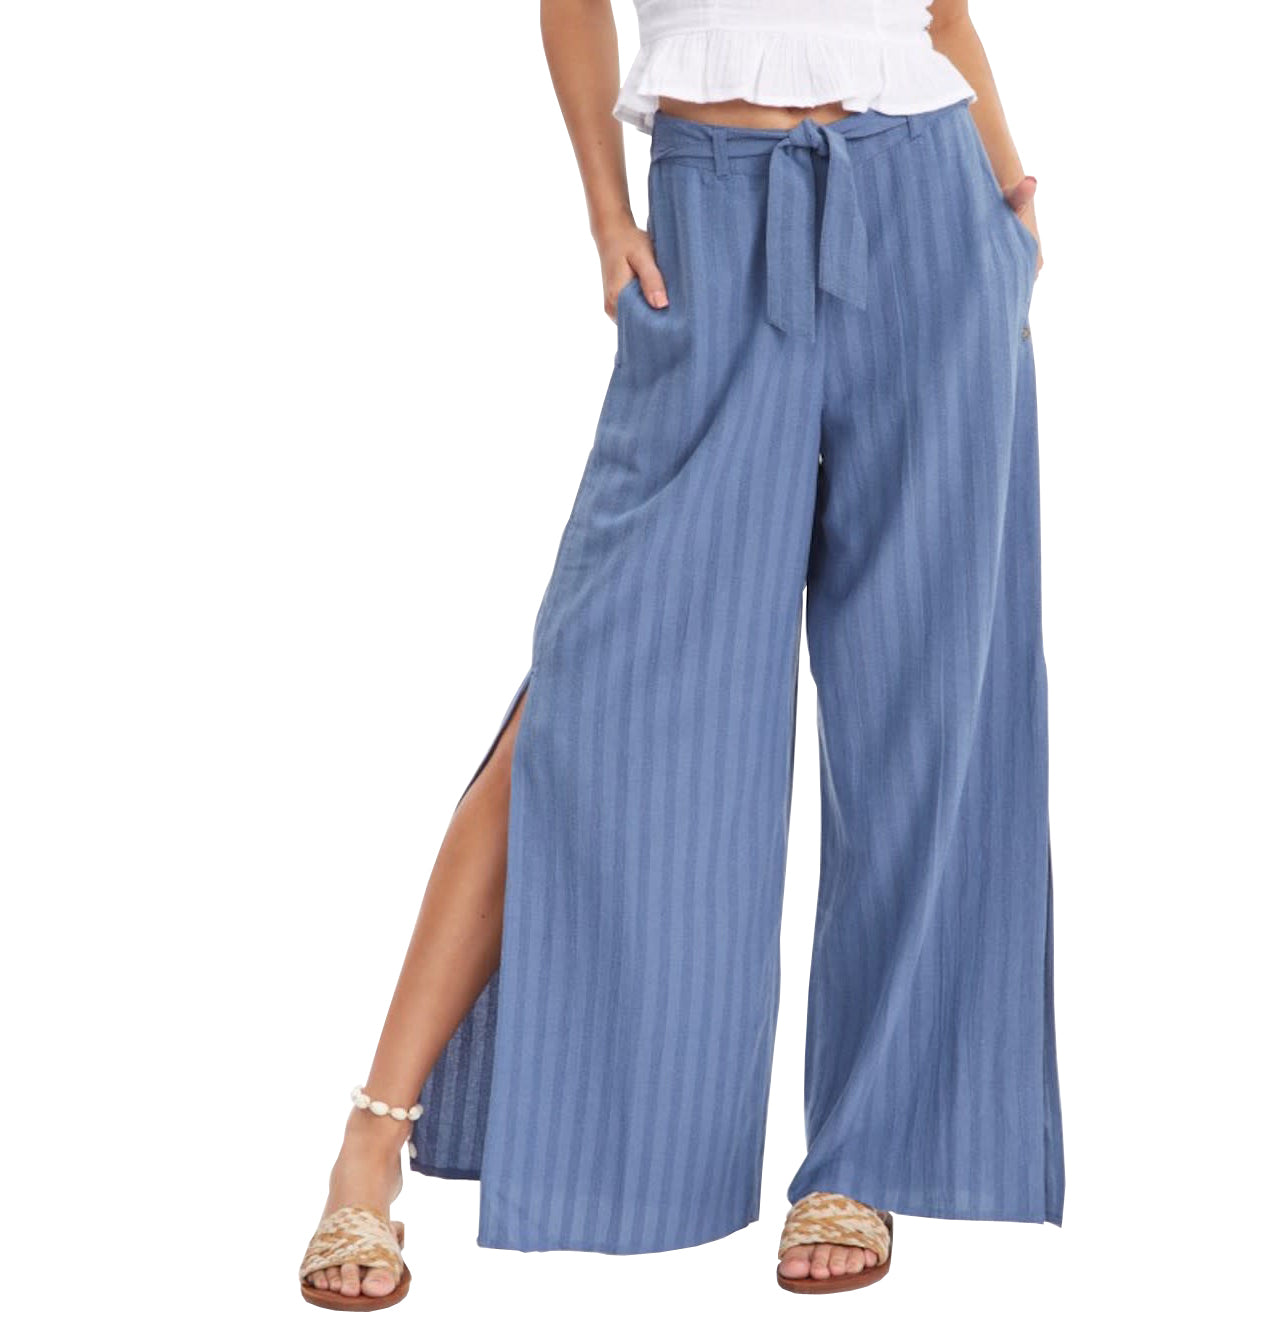 Roxy Sunkissed Pant BNG0 L